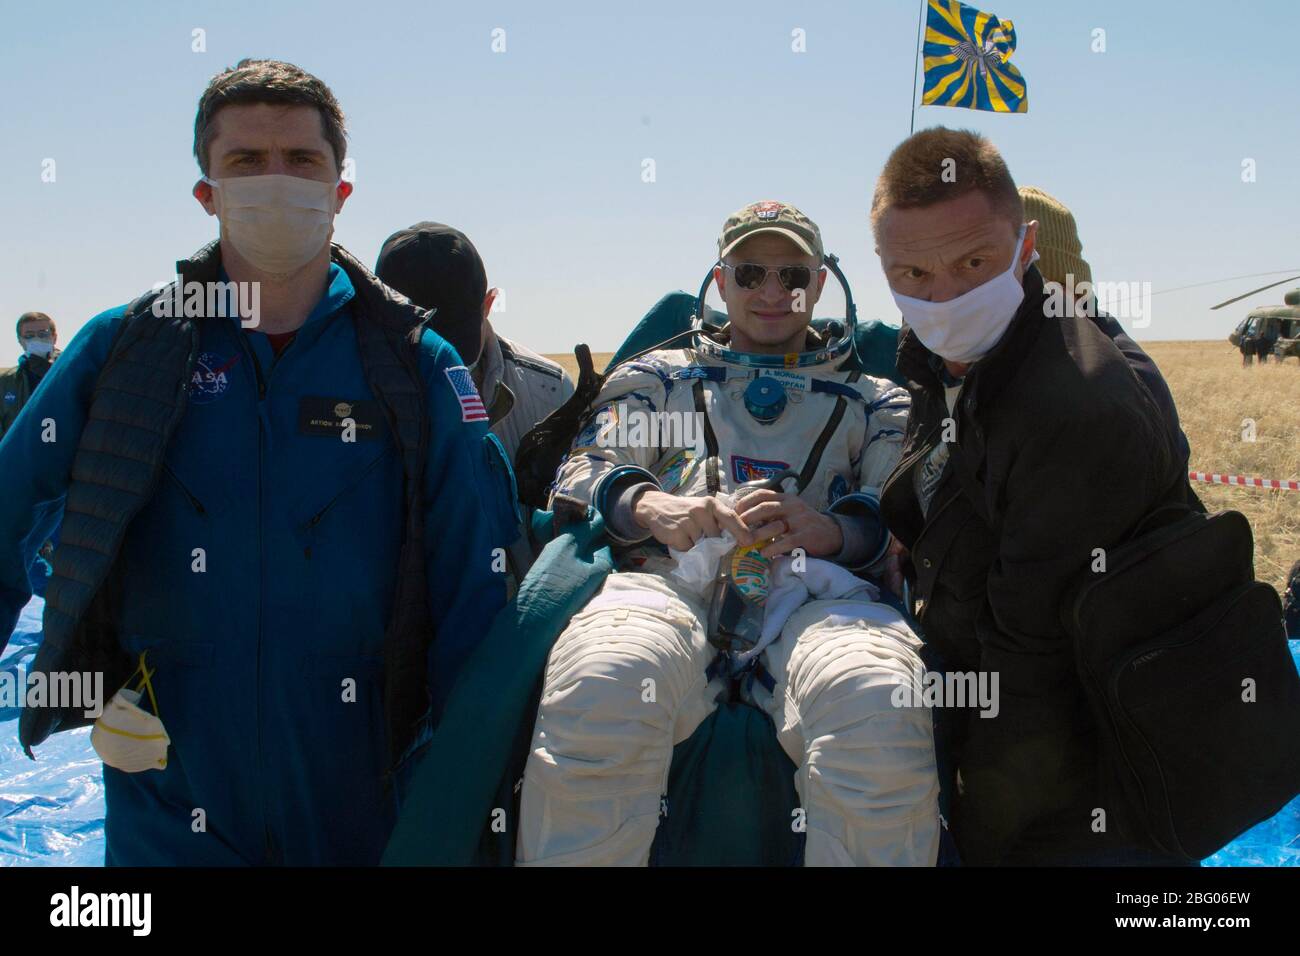 ZHEZKAZGAN, KAZAKHSTAN - 17 April 2020 - Expedition 62 crew member Andrew Morgan of NASA is carried to an All Terrain Vehicle (ATV) shortly after he, Stock Photo